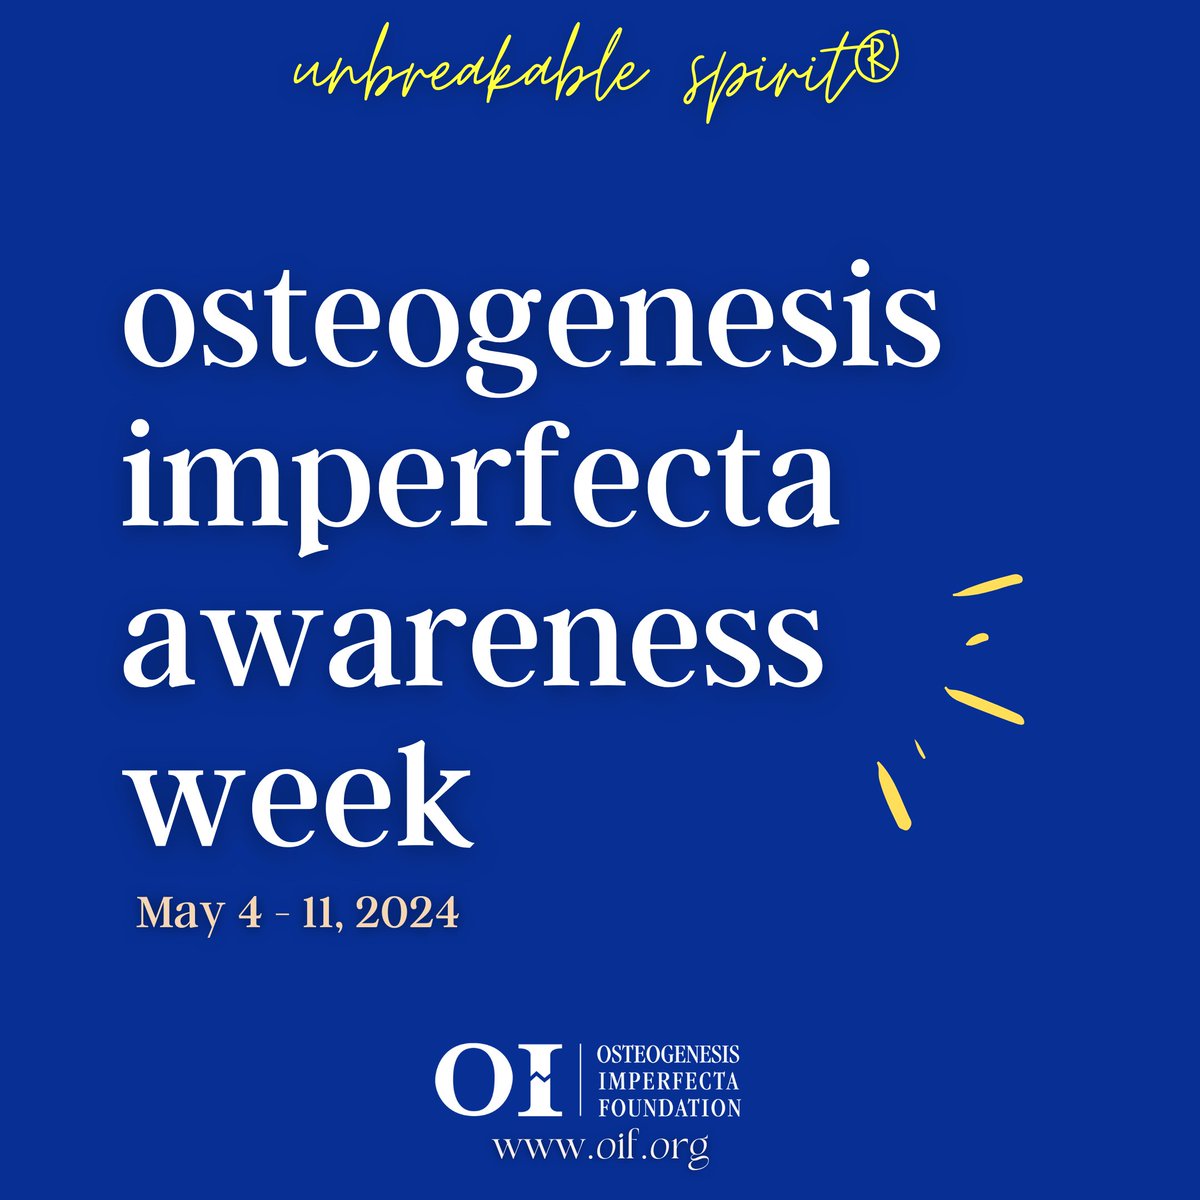 Happy National OI Awareness Week! Learn how you can get involved at oif.org/awarenessweek.
#OIawarenessweek #unbreakablespirit #Together4OI